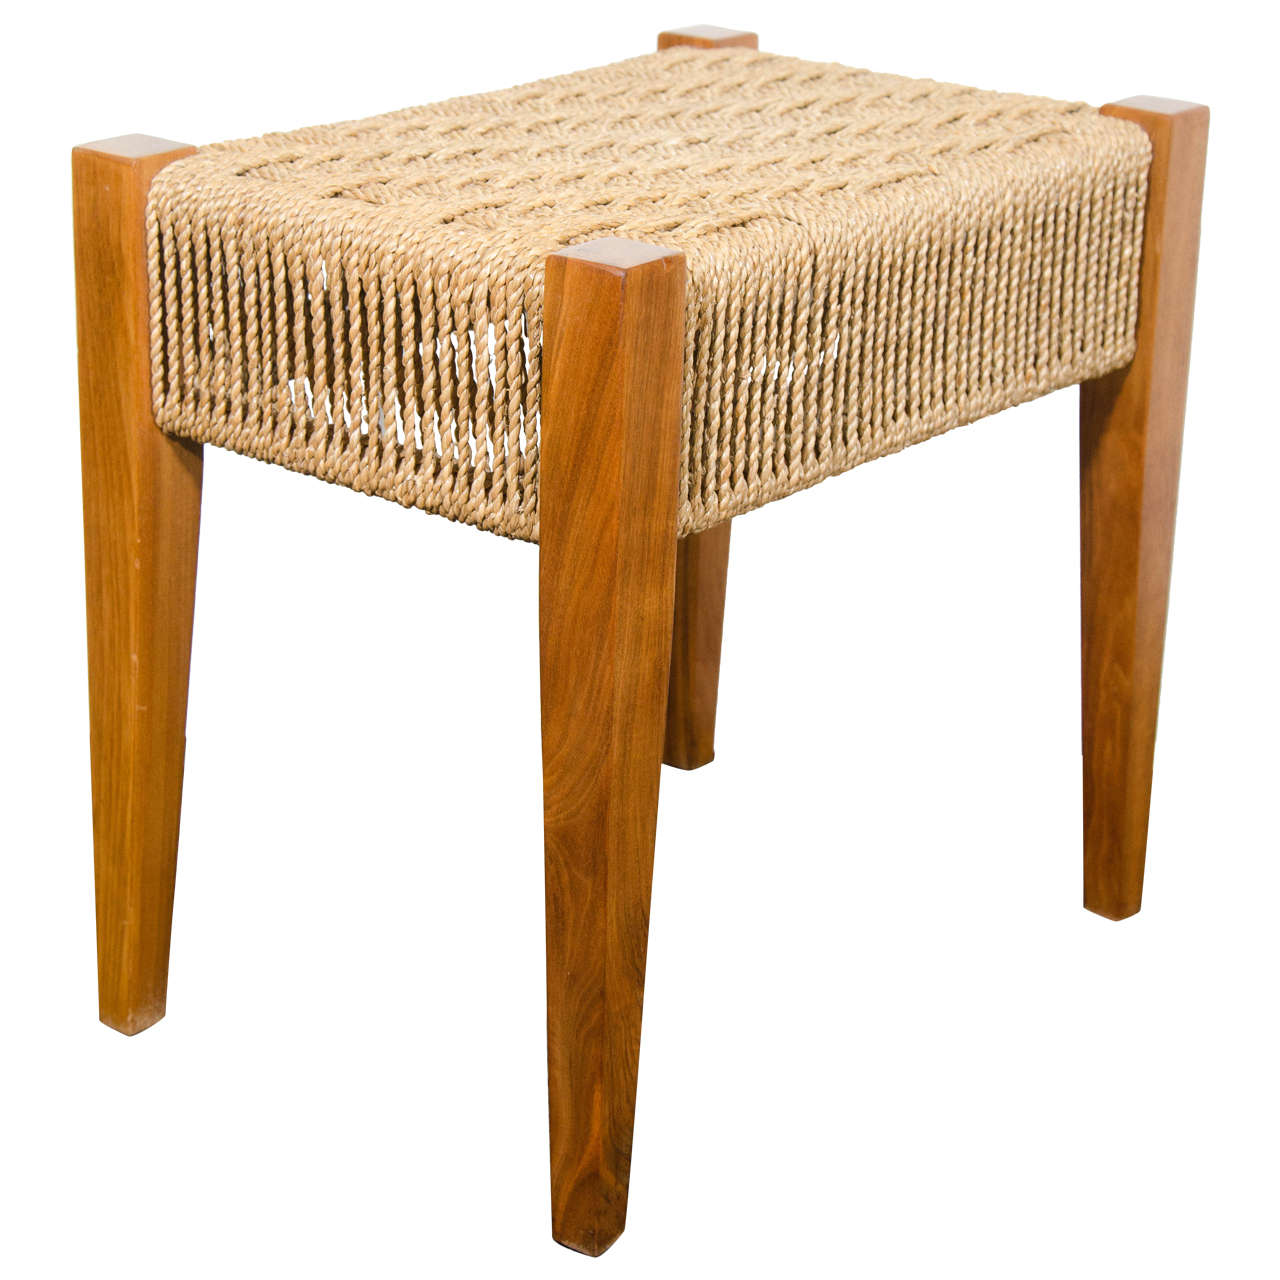 Midcentury Walnut Bench with Woven Rope Seat